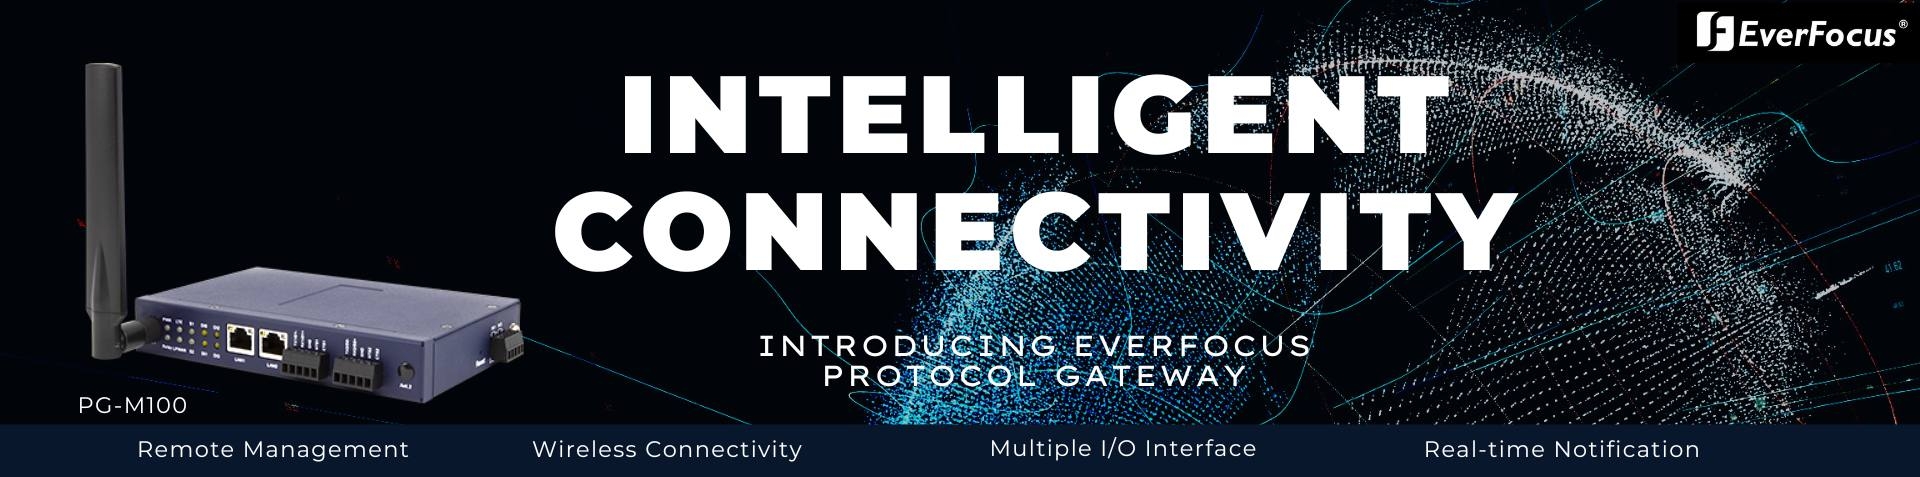 EverFocus Launches IoT Gateway to Redefine Ways of Connection!